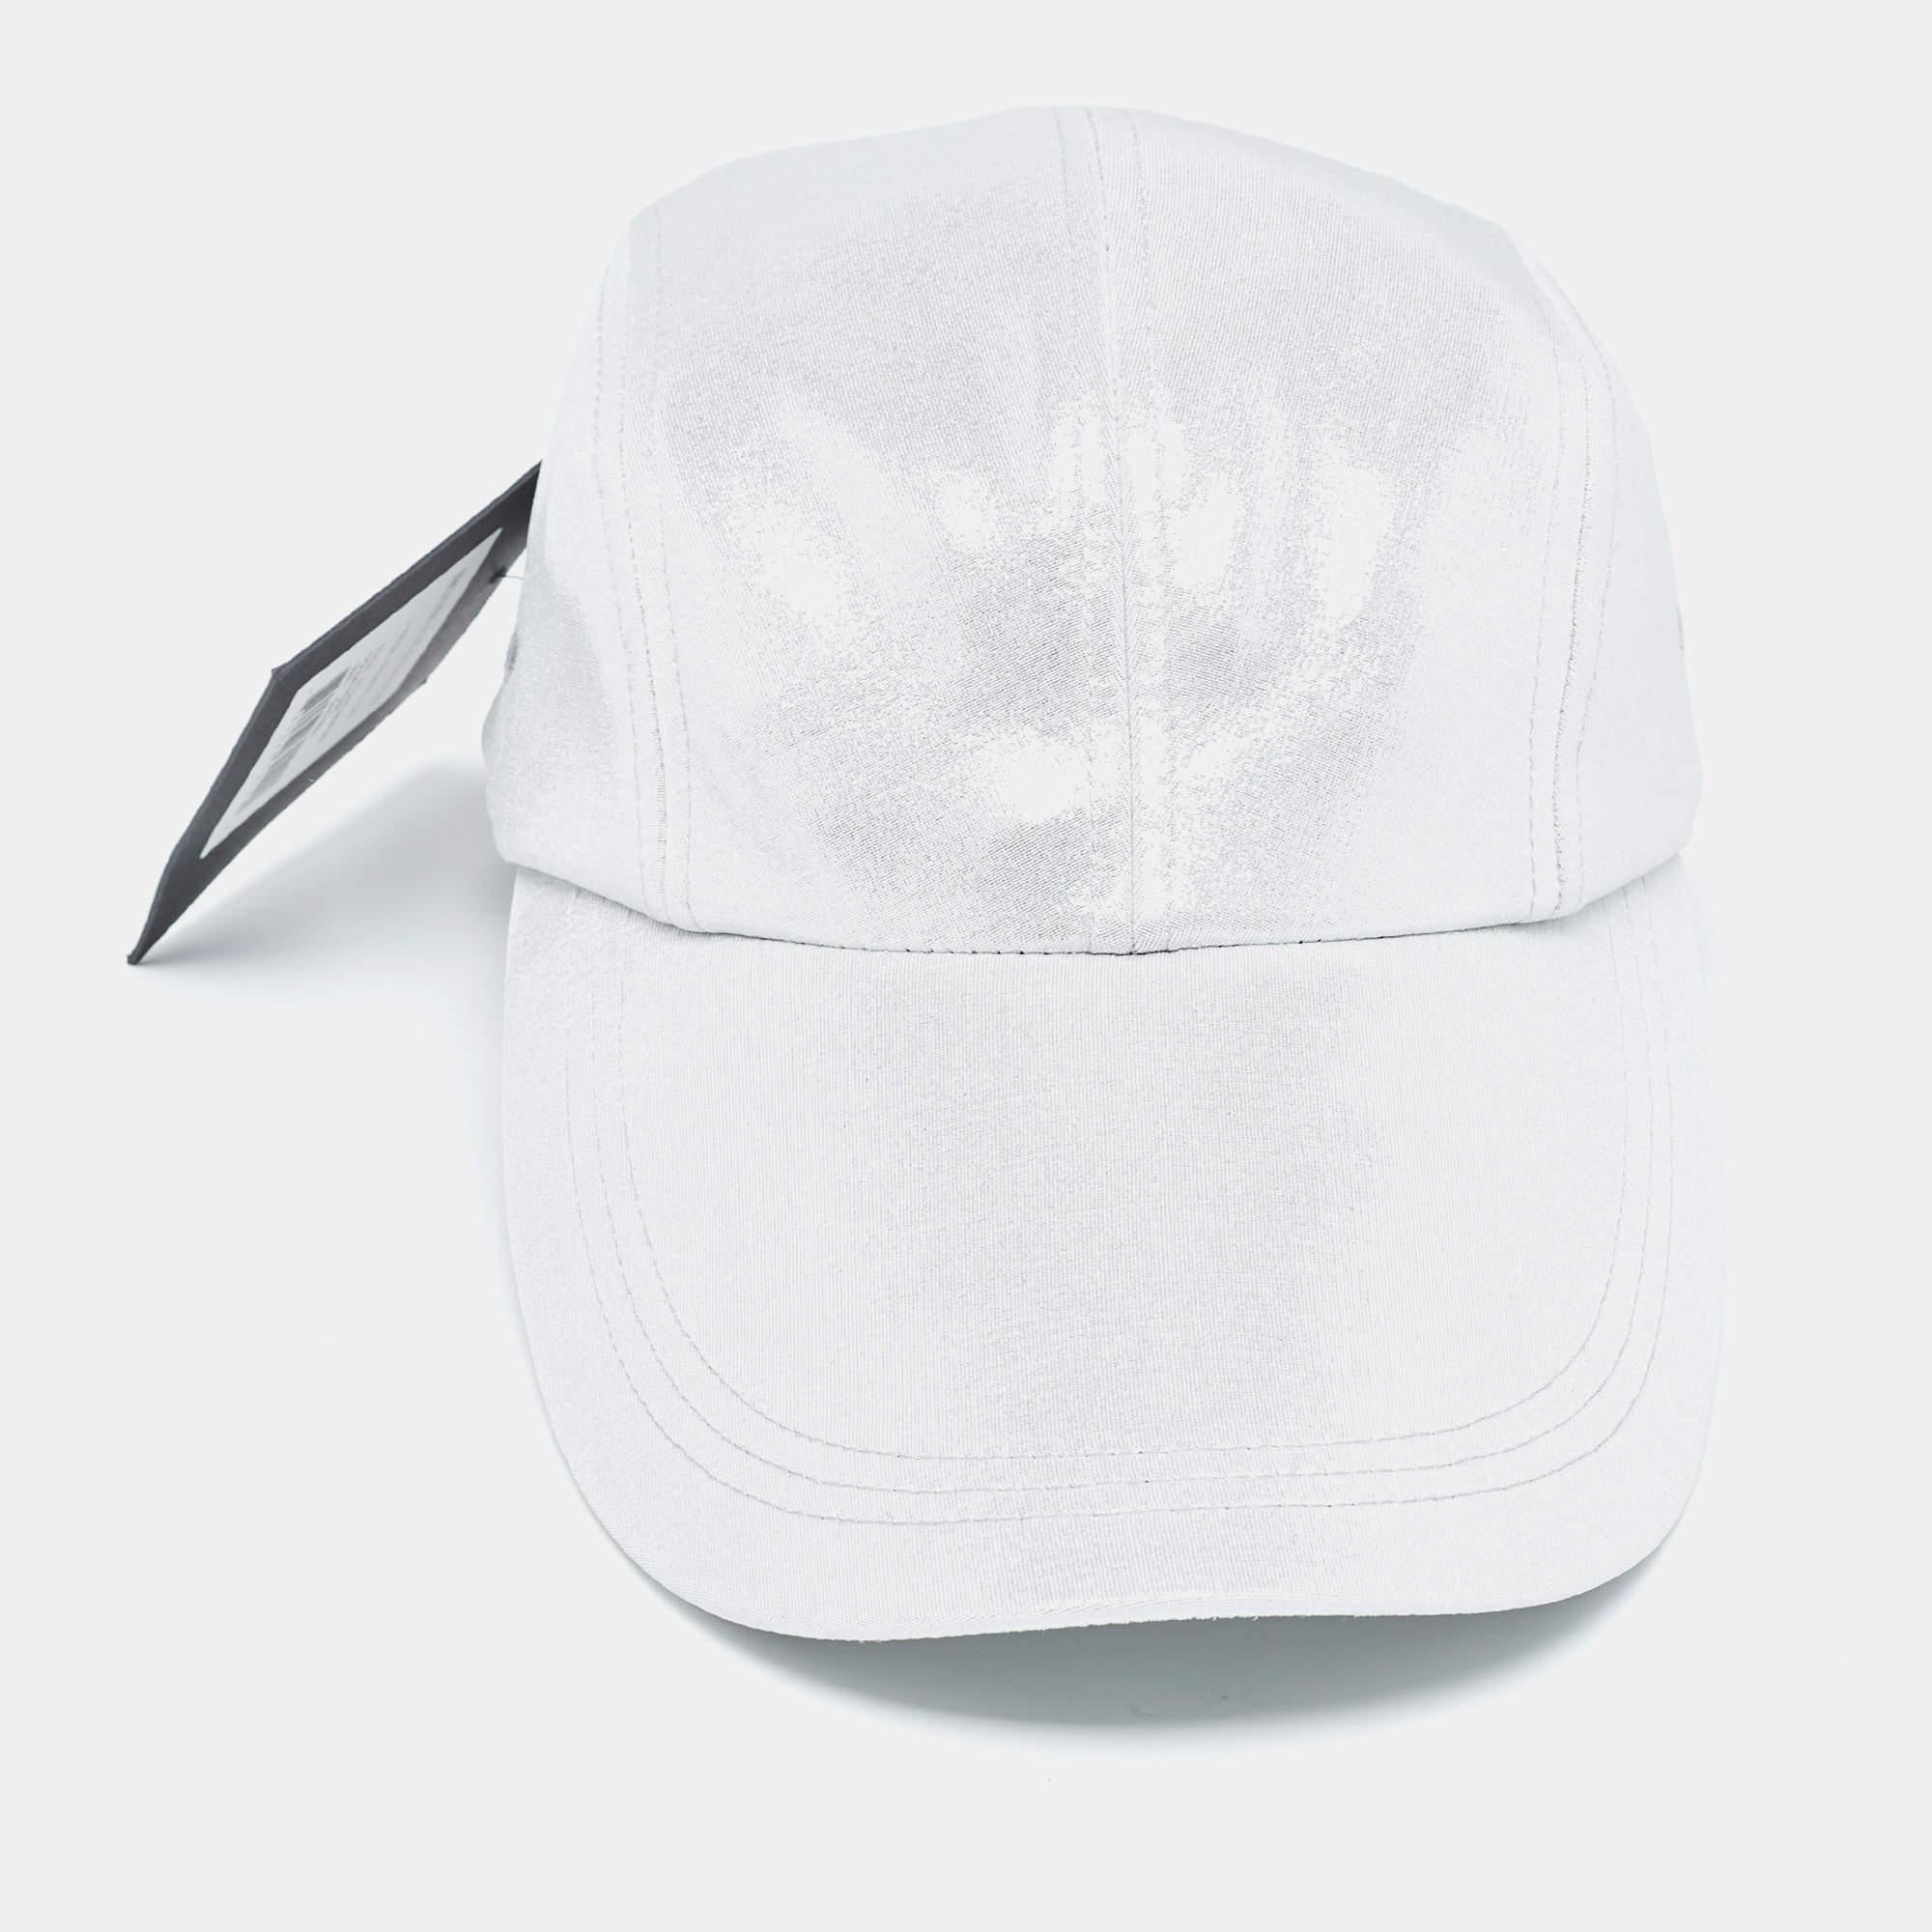 Caps are an ideal style statement with casual outfits. This Norma Kamali piece is made from quality materials and features signature elements. This piece will be a smart addition to your cap collection.

Includes: Brand Tag